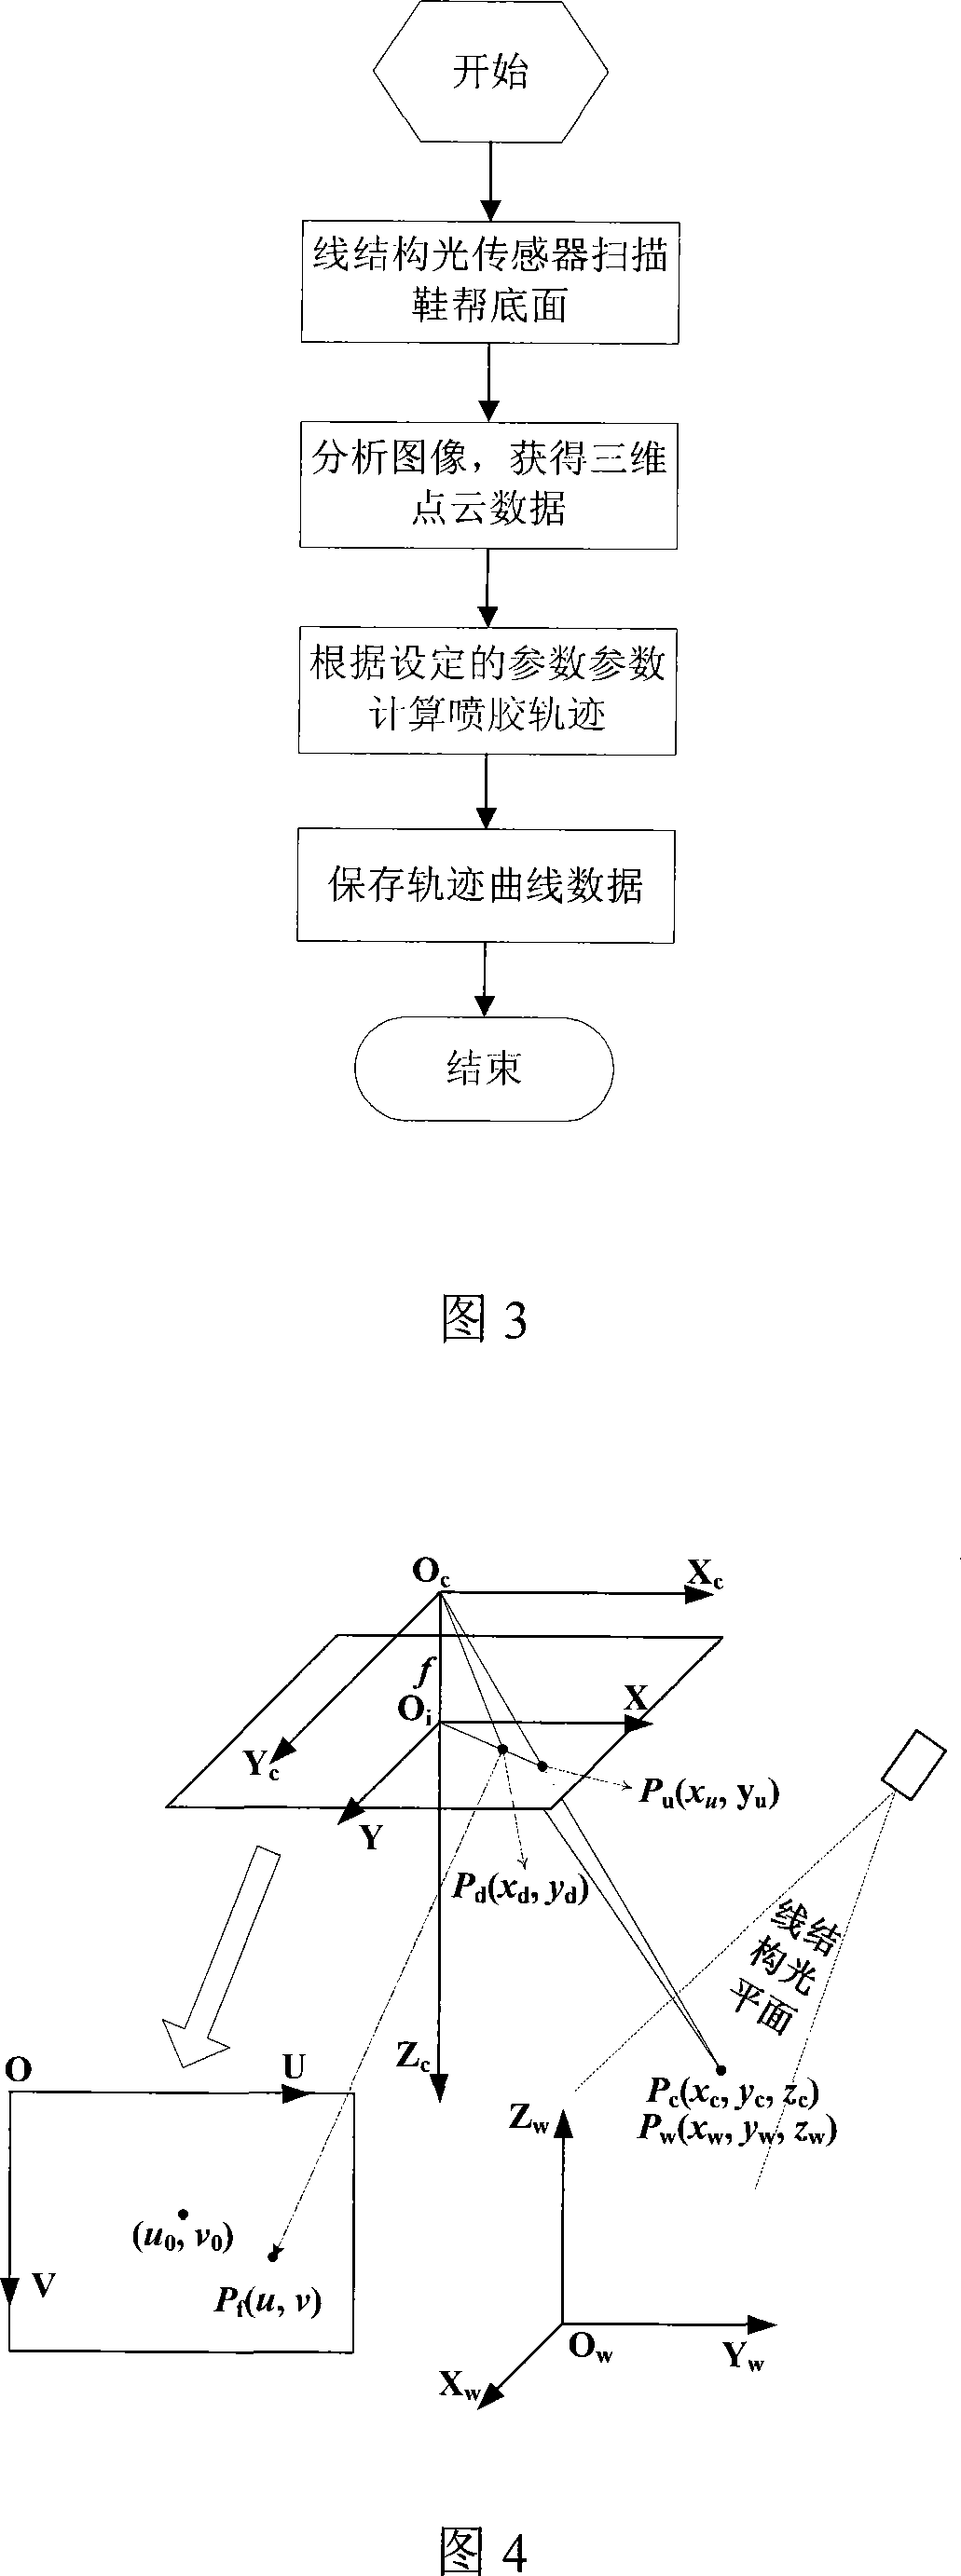 Method and system for automatic generating shoe sole photopolymer coating track based on linear structure optical sensor